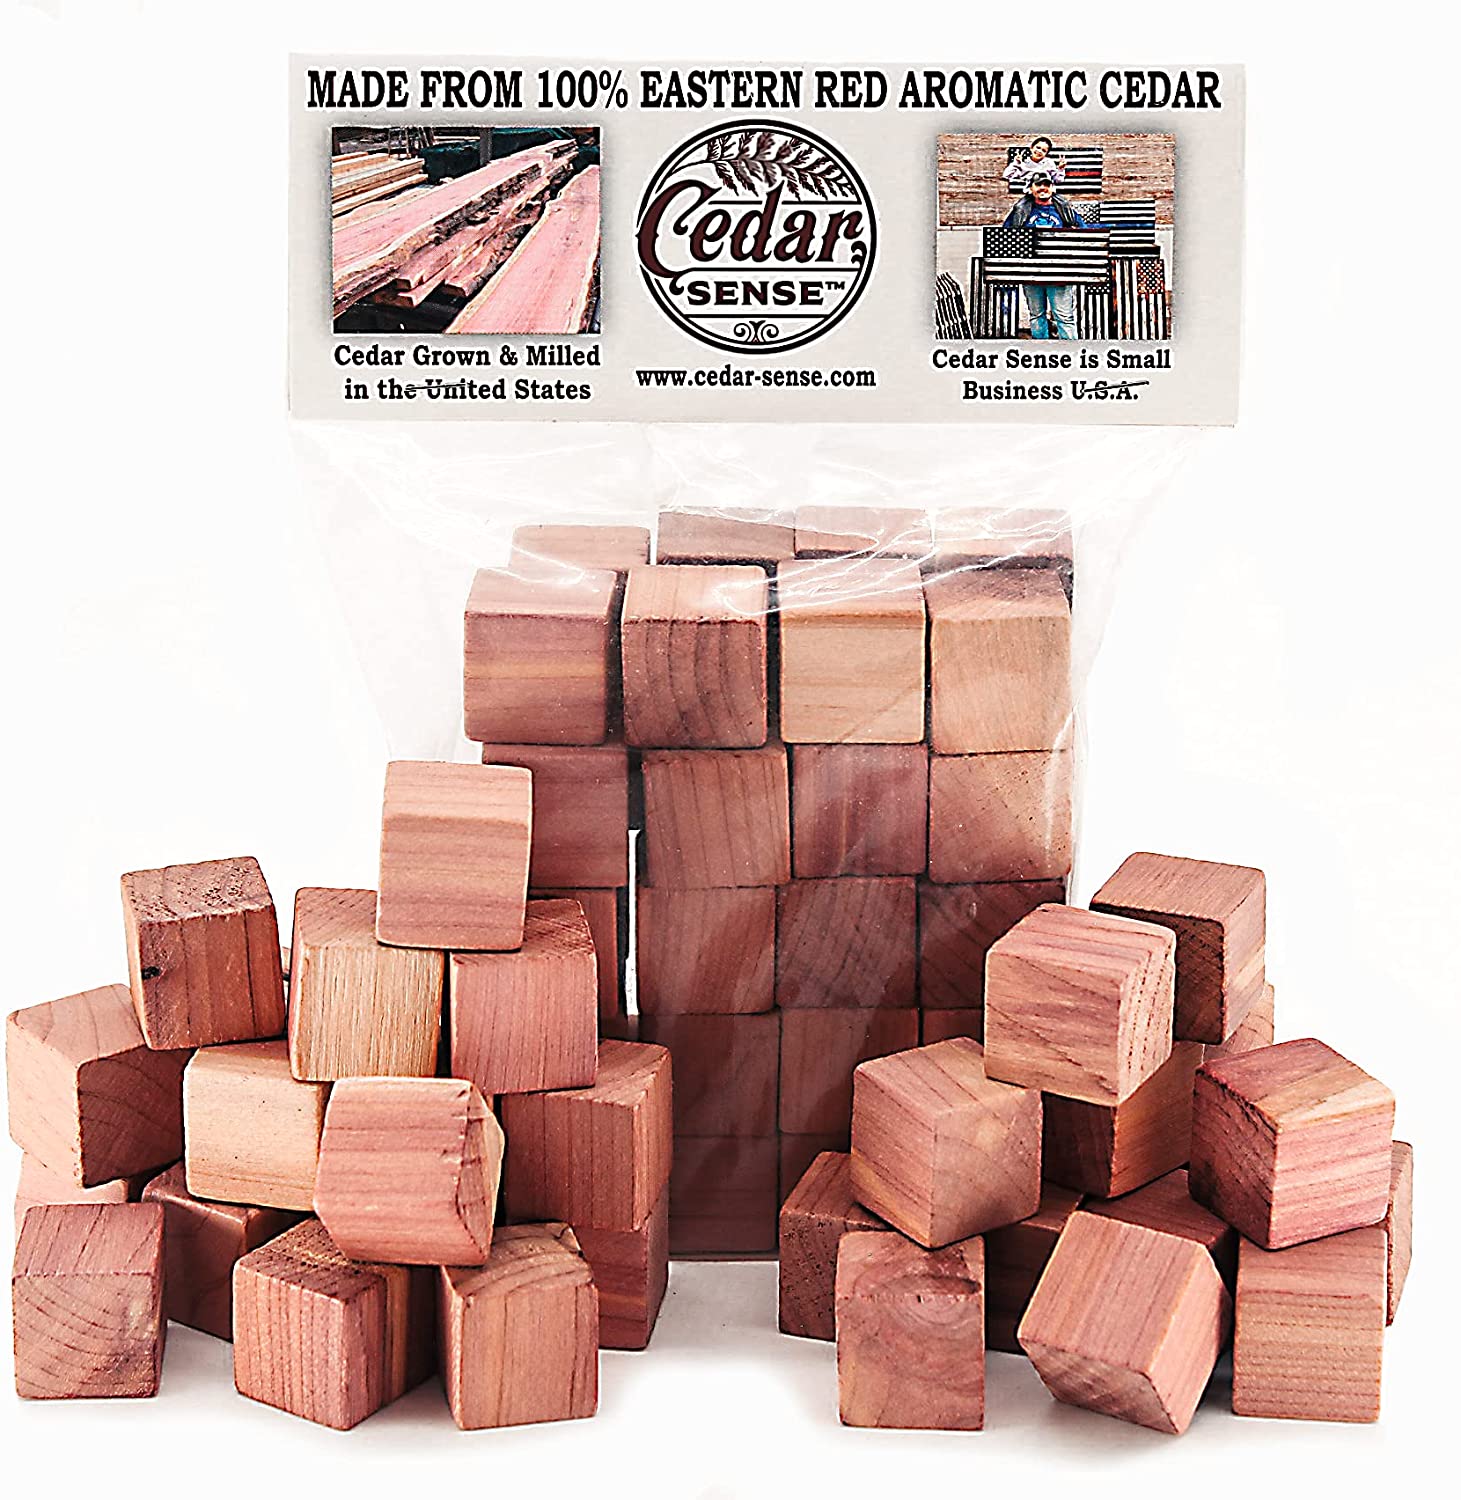 Aromatic Cedar Wood Cube Blocks Chemical Free Lots of 100 or 200 Cubes S5939 